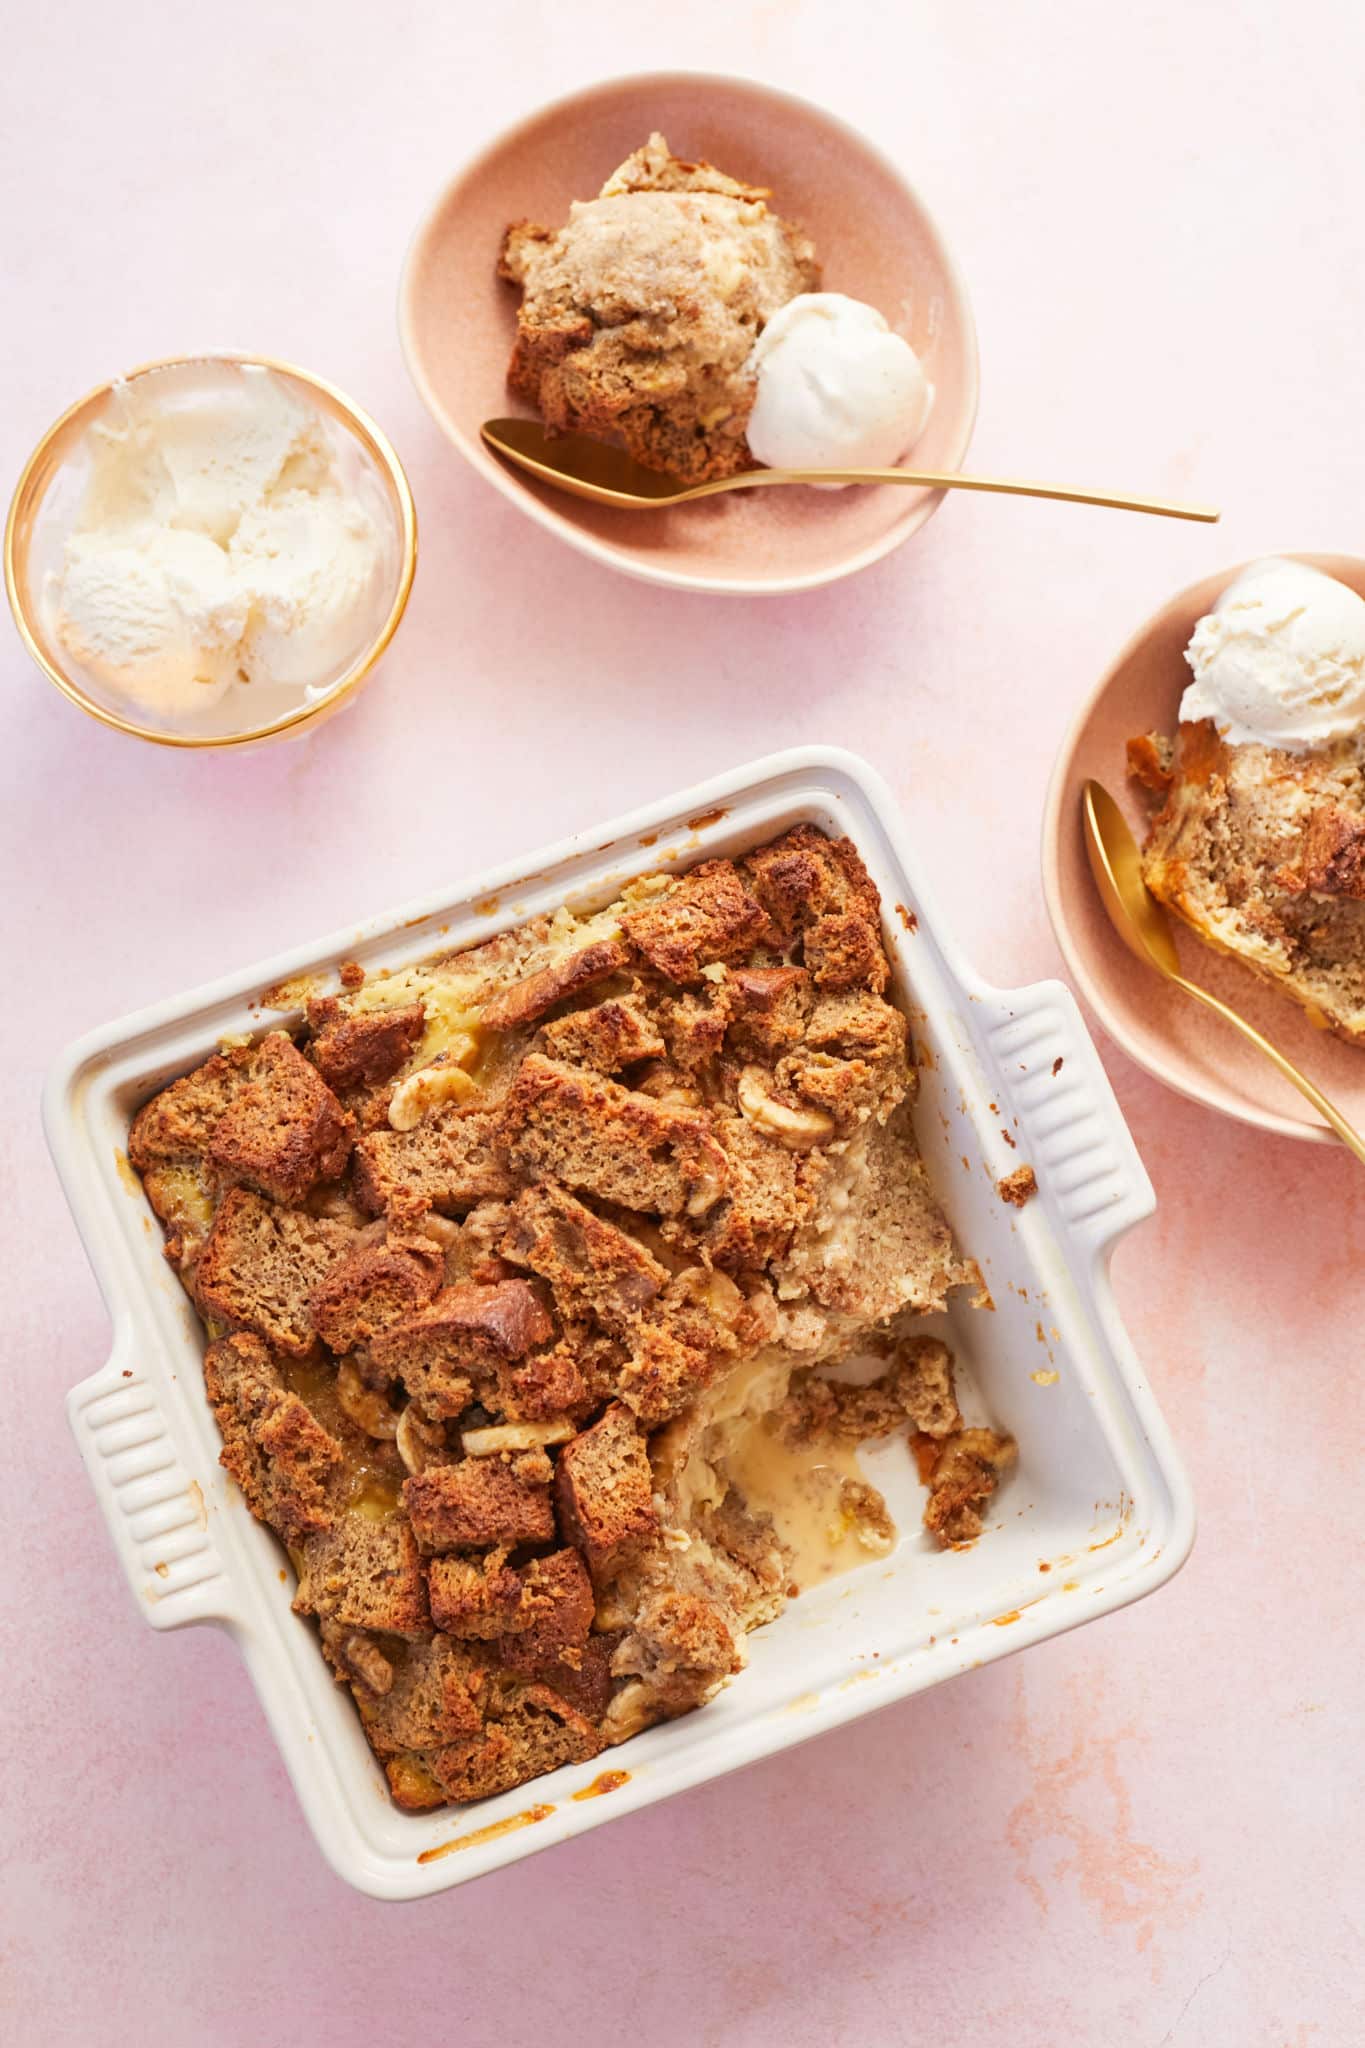 Banana Bread Pudding in a white dish next to bowls with servings.